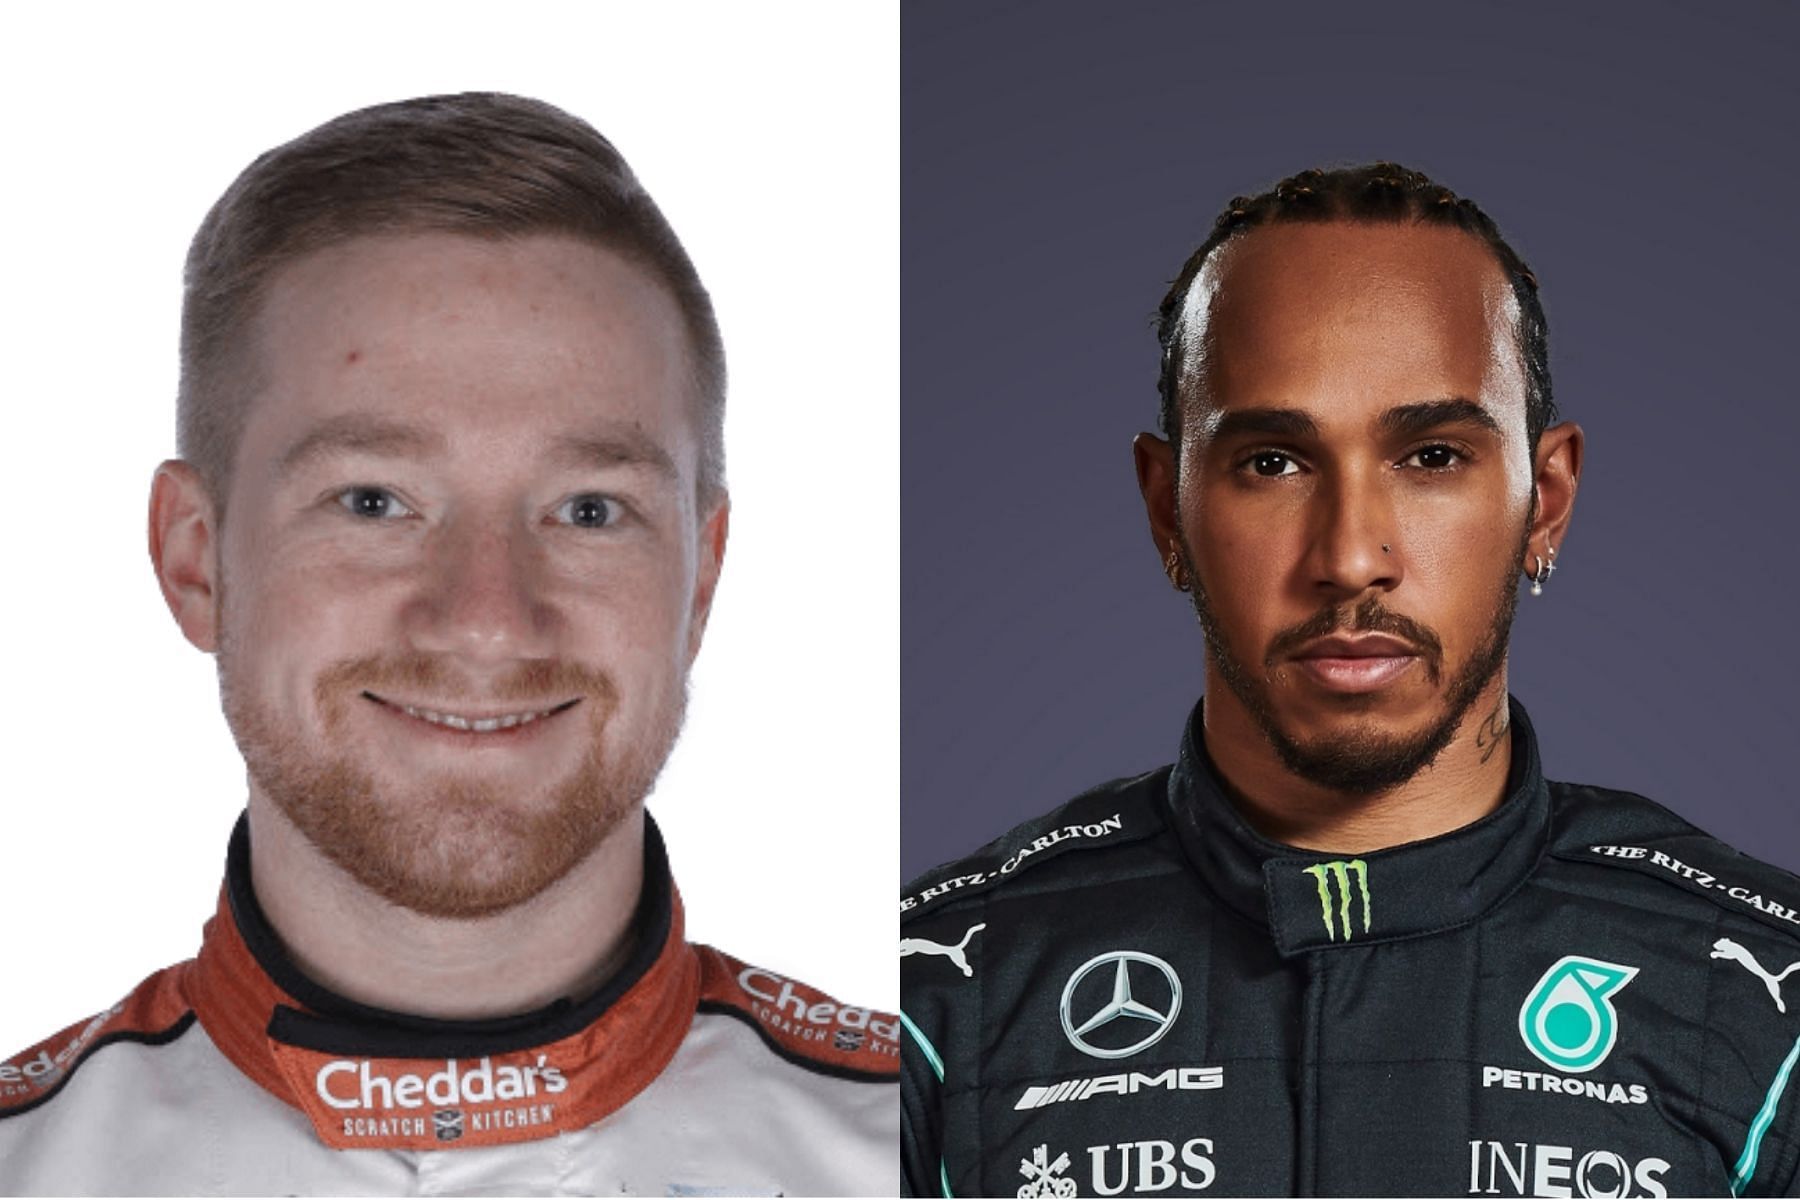 Tyler Reddick (left) feels Lewis Hamilton (right) taking part in NASCAR could level up the competition (Image source: NASCAR/F1)